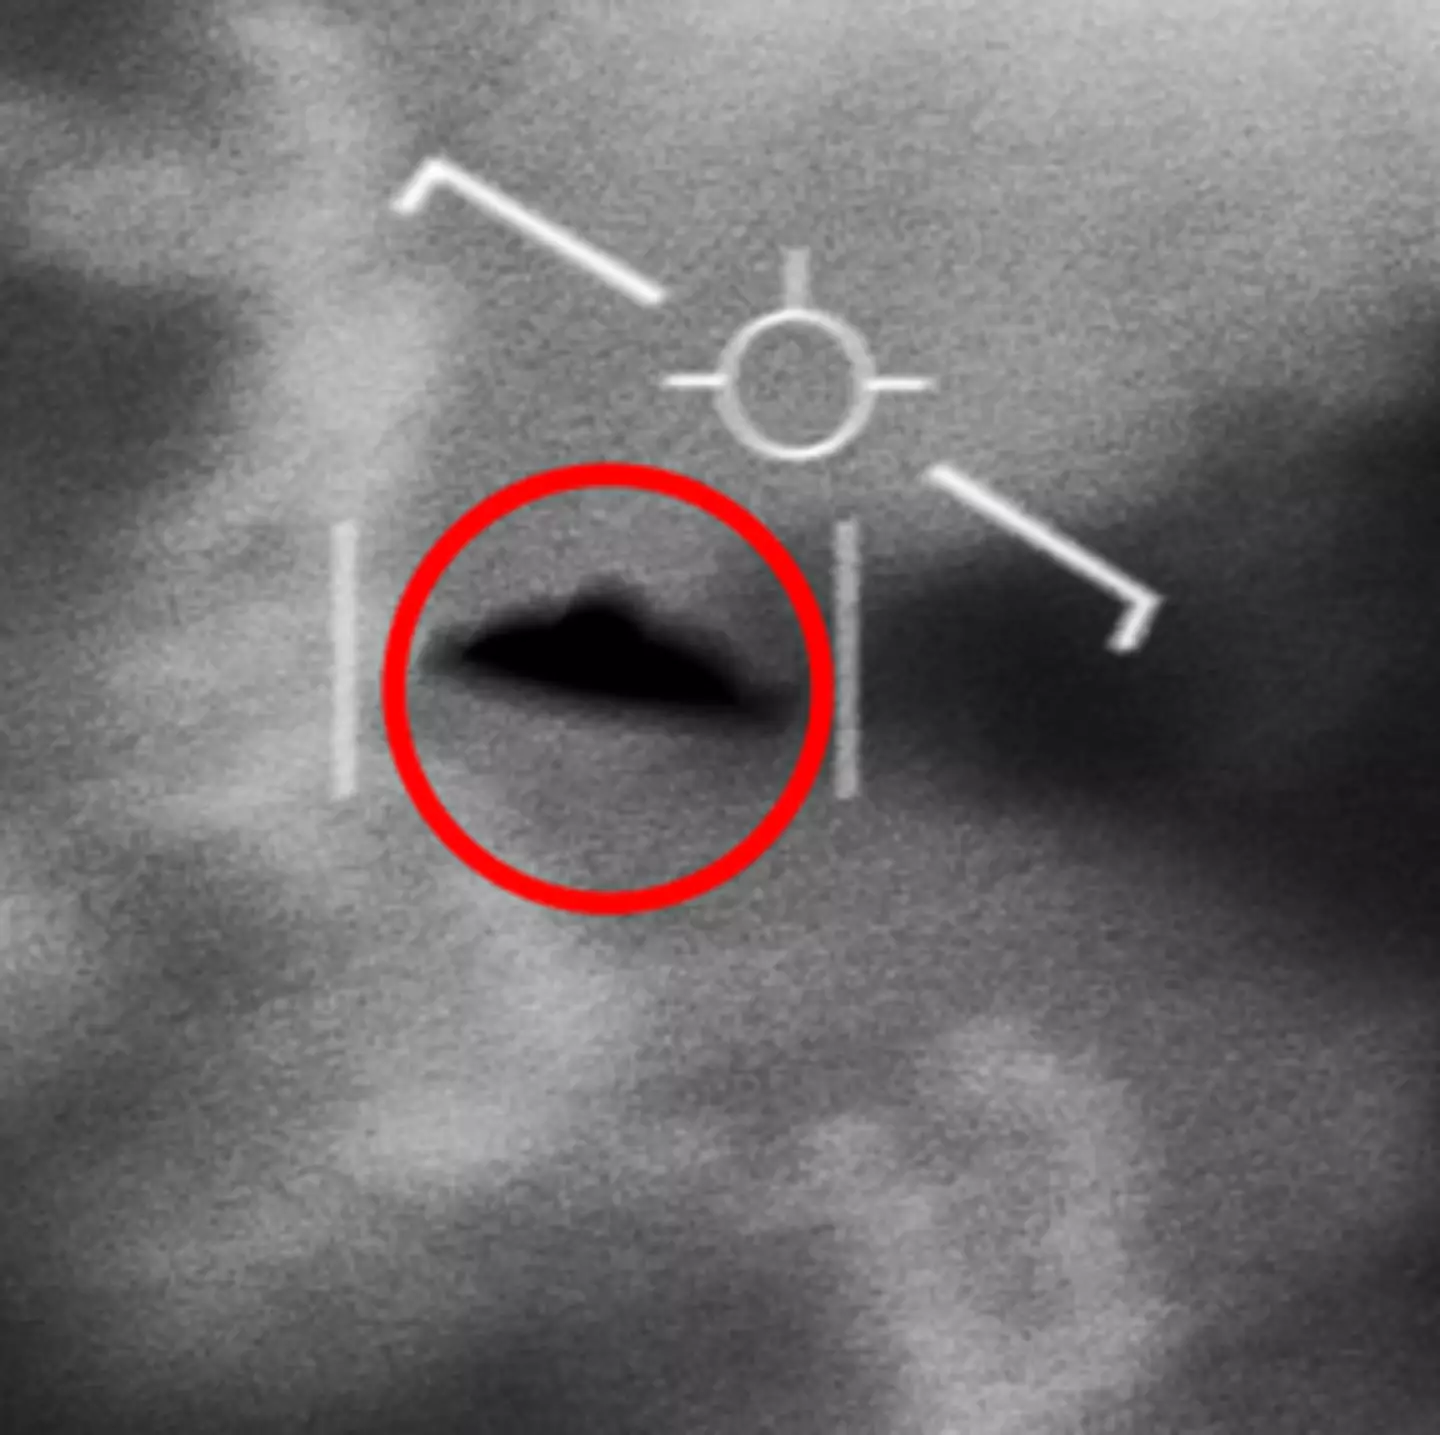 Harvard professor claims that UFOs could have travelled to Earth via 'extra dimensions'